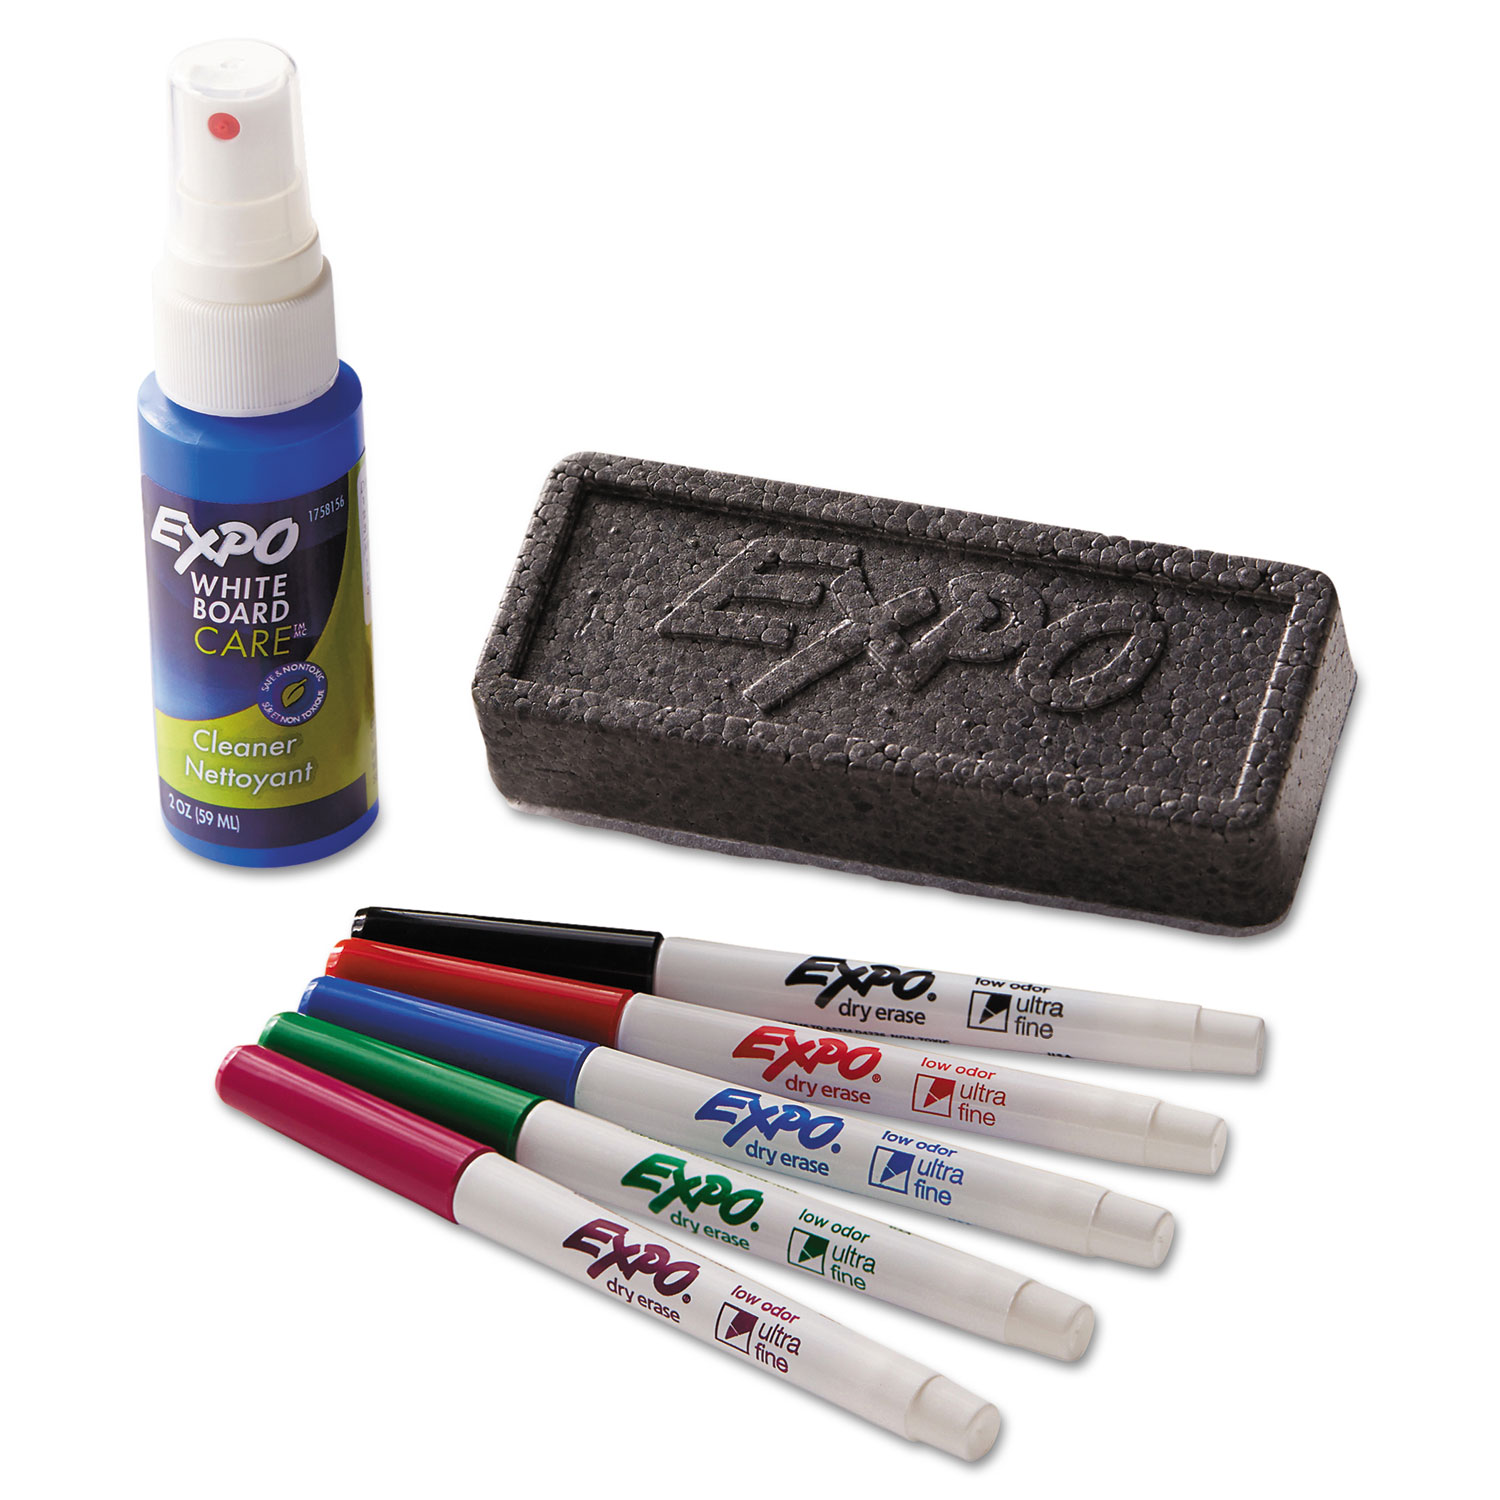 Expo Dry Erase Marker Set of 12 Markers, Eraser and Spray Cleaner